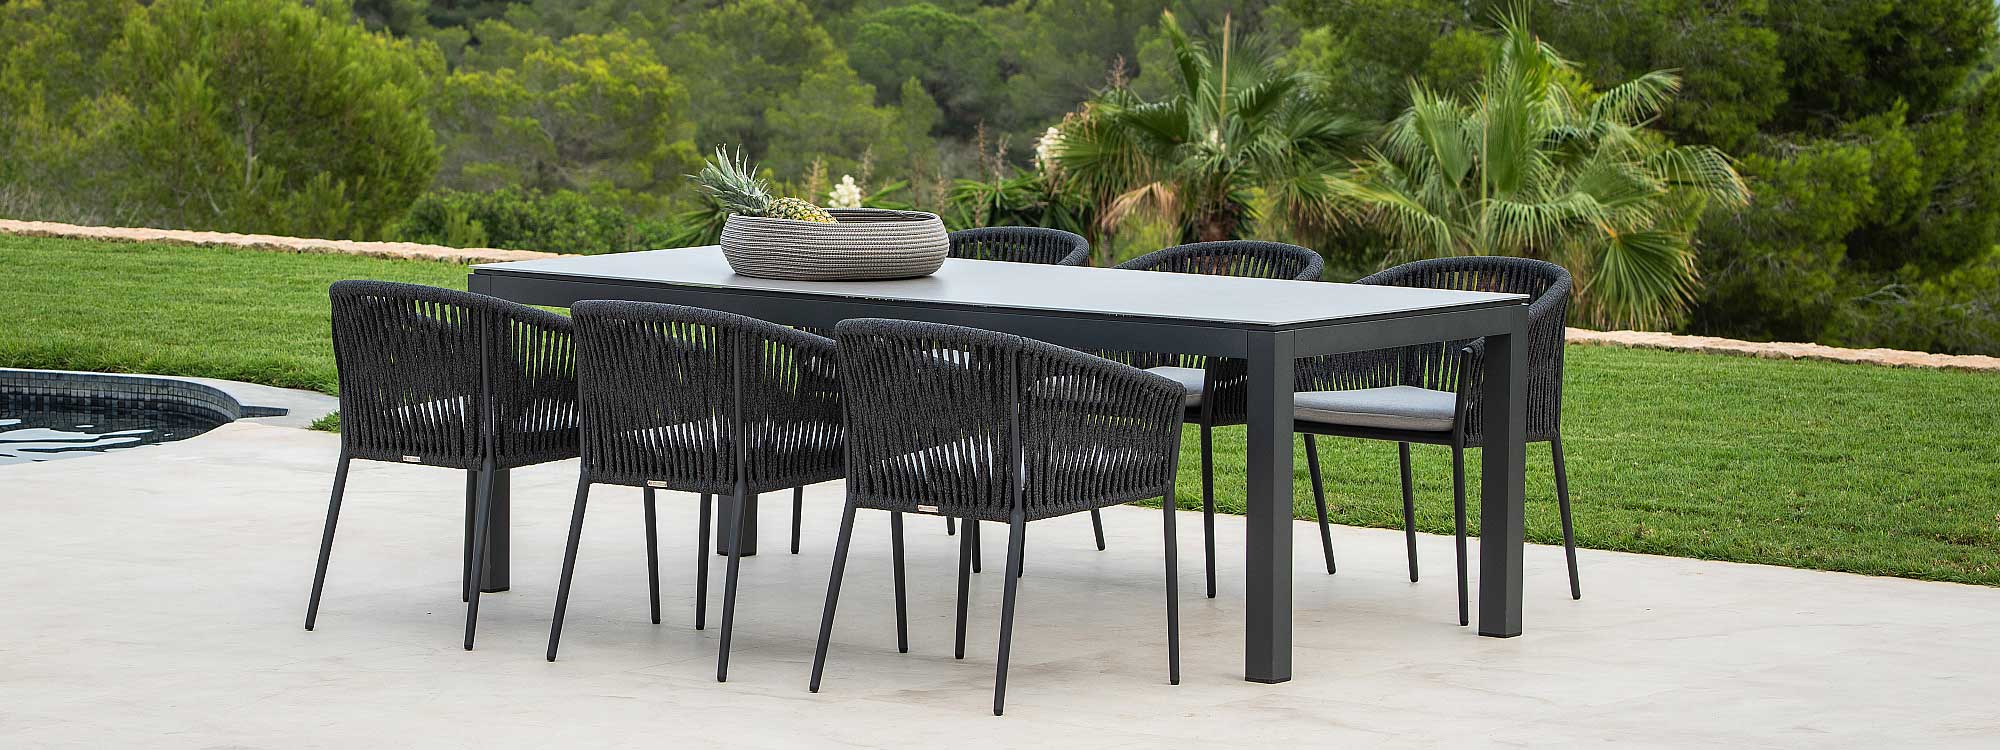 Image of Fortuna Rope black tub garden chairs around Jati & Kebon chunky rectangular garden table, shown on terrace with woodland in the background